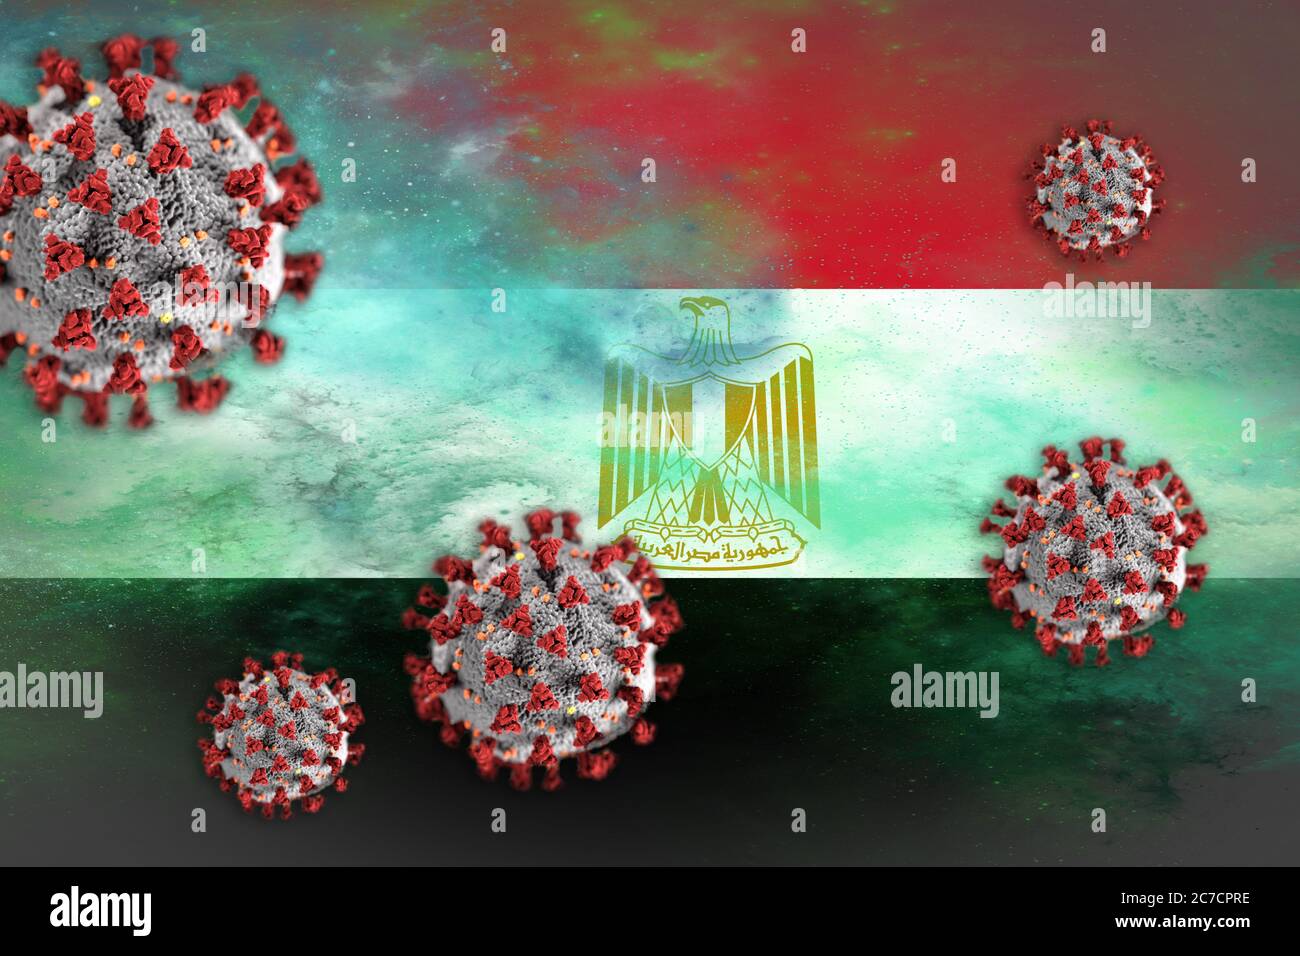 Concept of Coronavirus or Covid-19 particles overshadowing flag of Egypt symbolising outbreak. Stock Photo